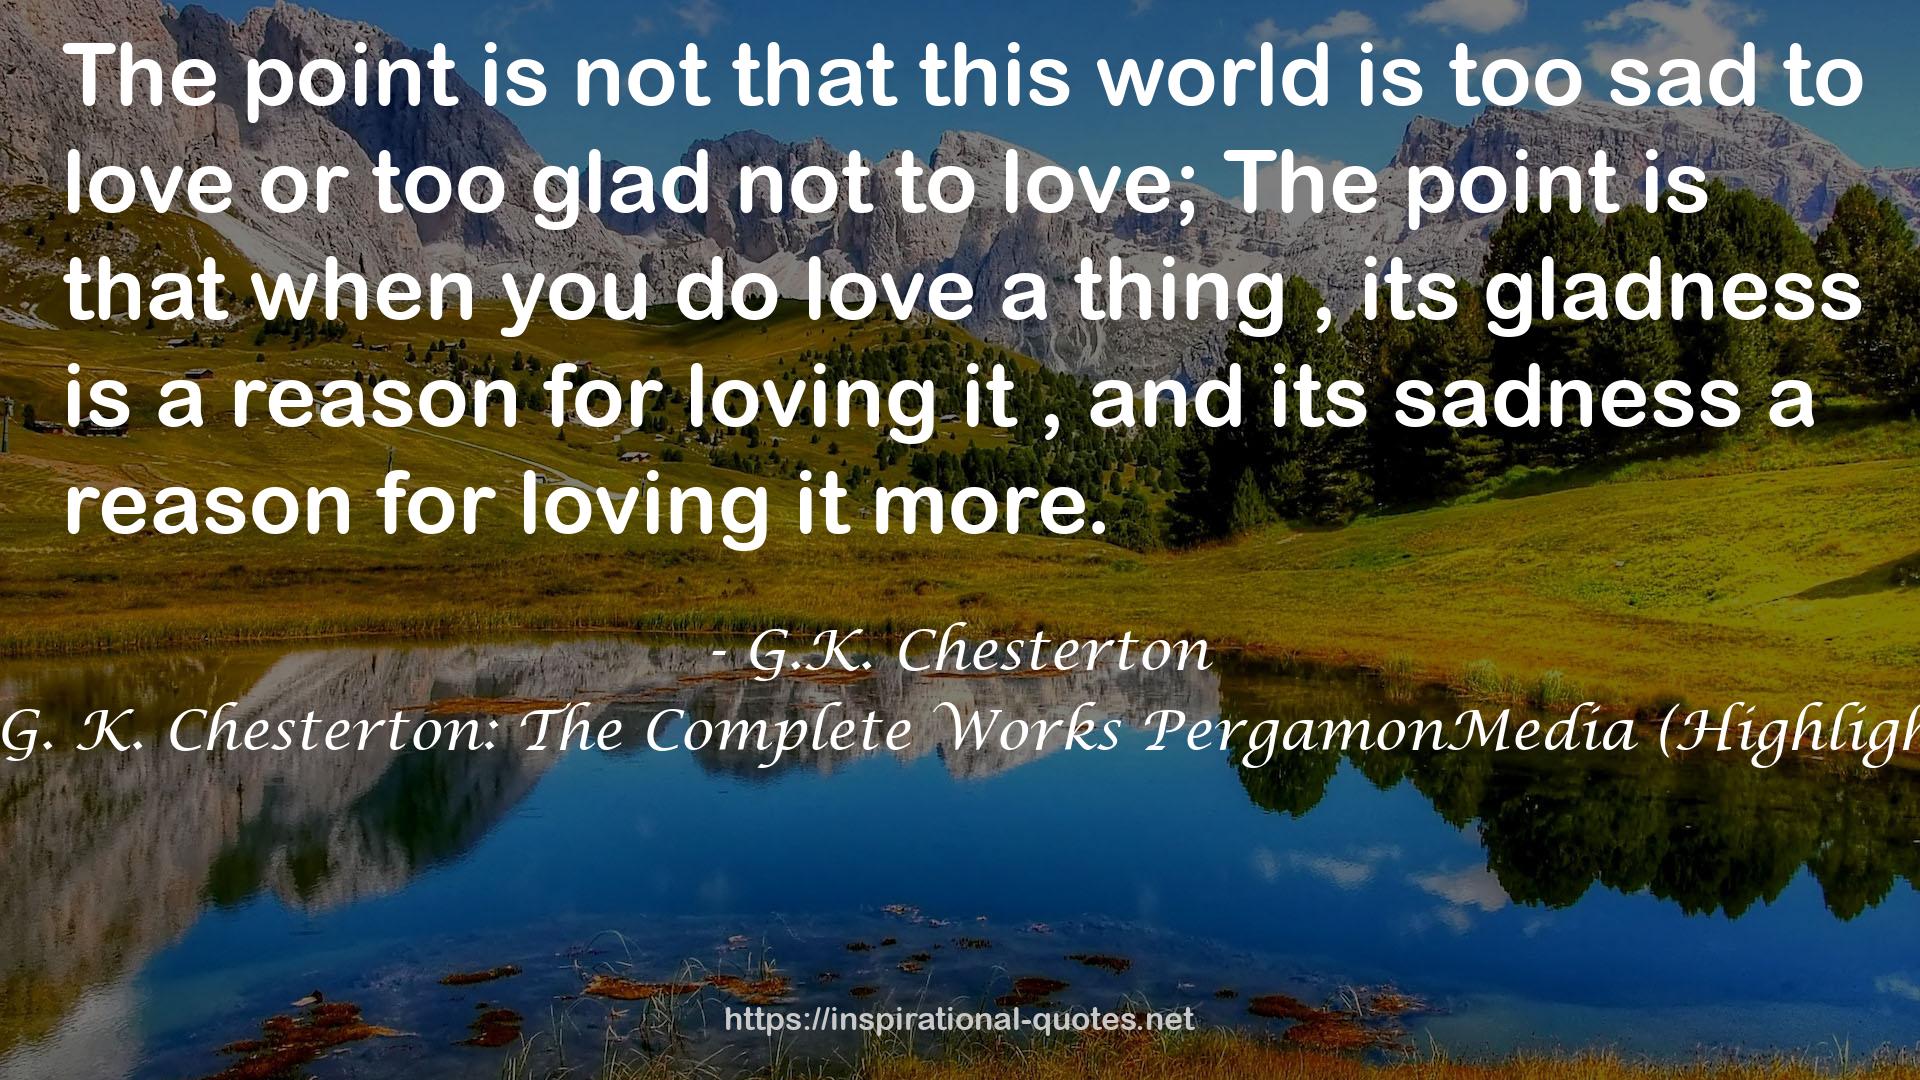 The Collected Works of G. K. Chesterton: The Complete Works PergamonMedia (Highlights of World Literature) QUOTES